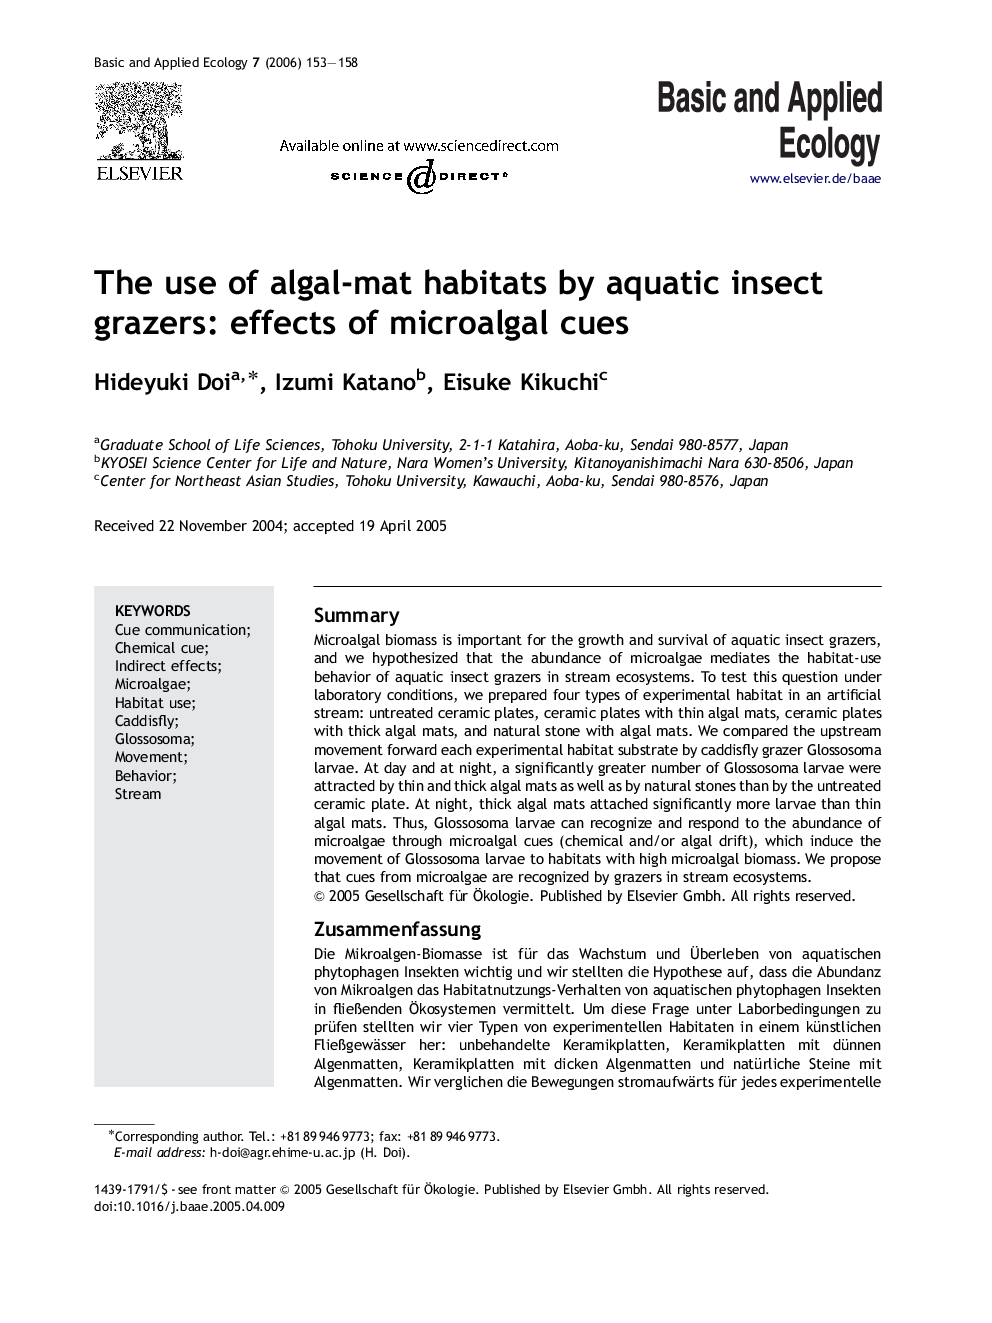 The use of algal-mat habitats by aquatic insect grazers: effects of microalgal cues